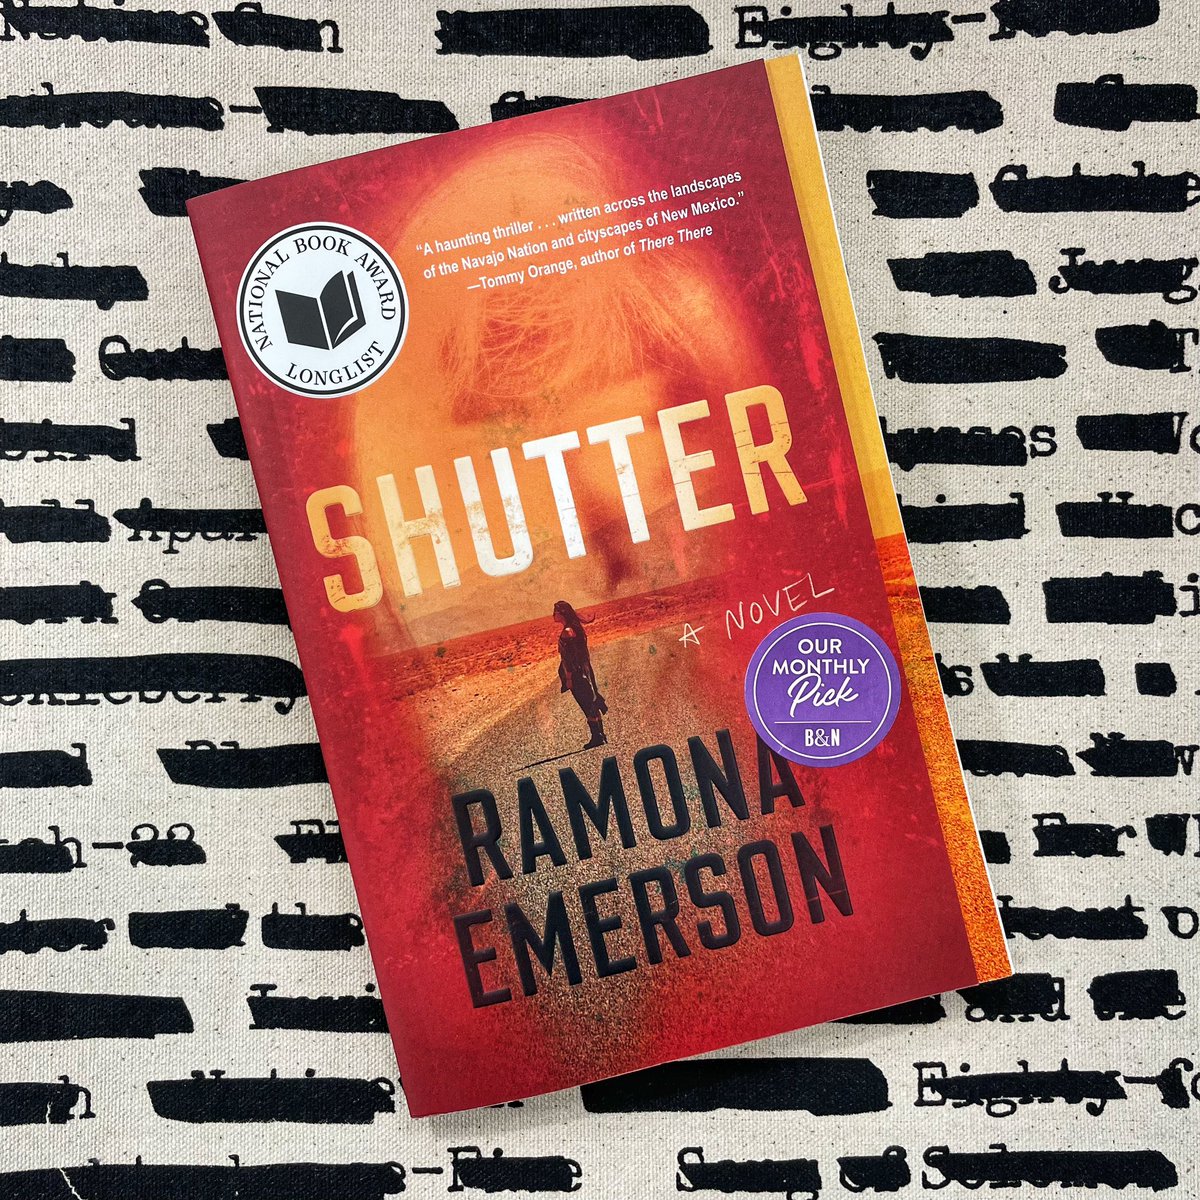 A forensic photographer who can communicate with spirits is sent on a revenge quest when the ghost of a supposed suicide latches onto her. Our May Mystery & Thriller pick, Shutter, is an explosive debut from Dîné writer Romana Emerson.

#BNBuzz #bnbirkdale #BNMonthlyPicks